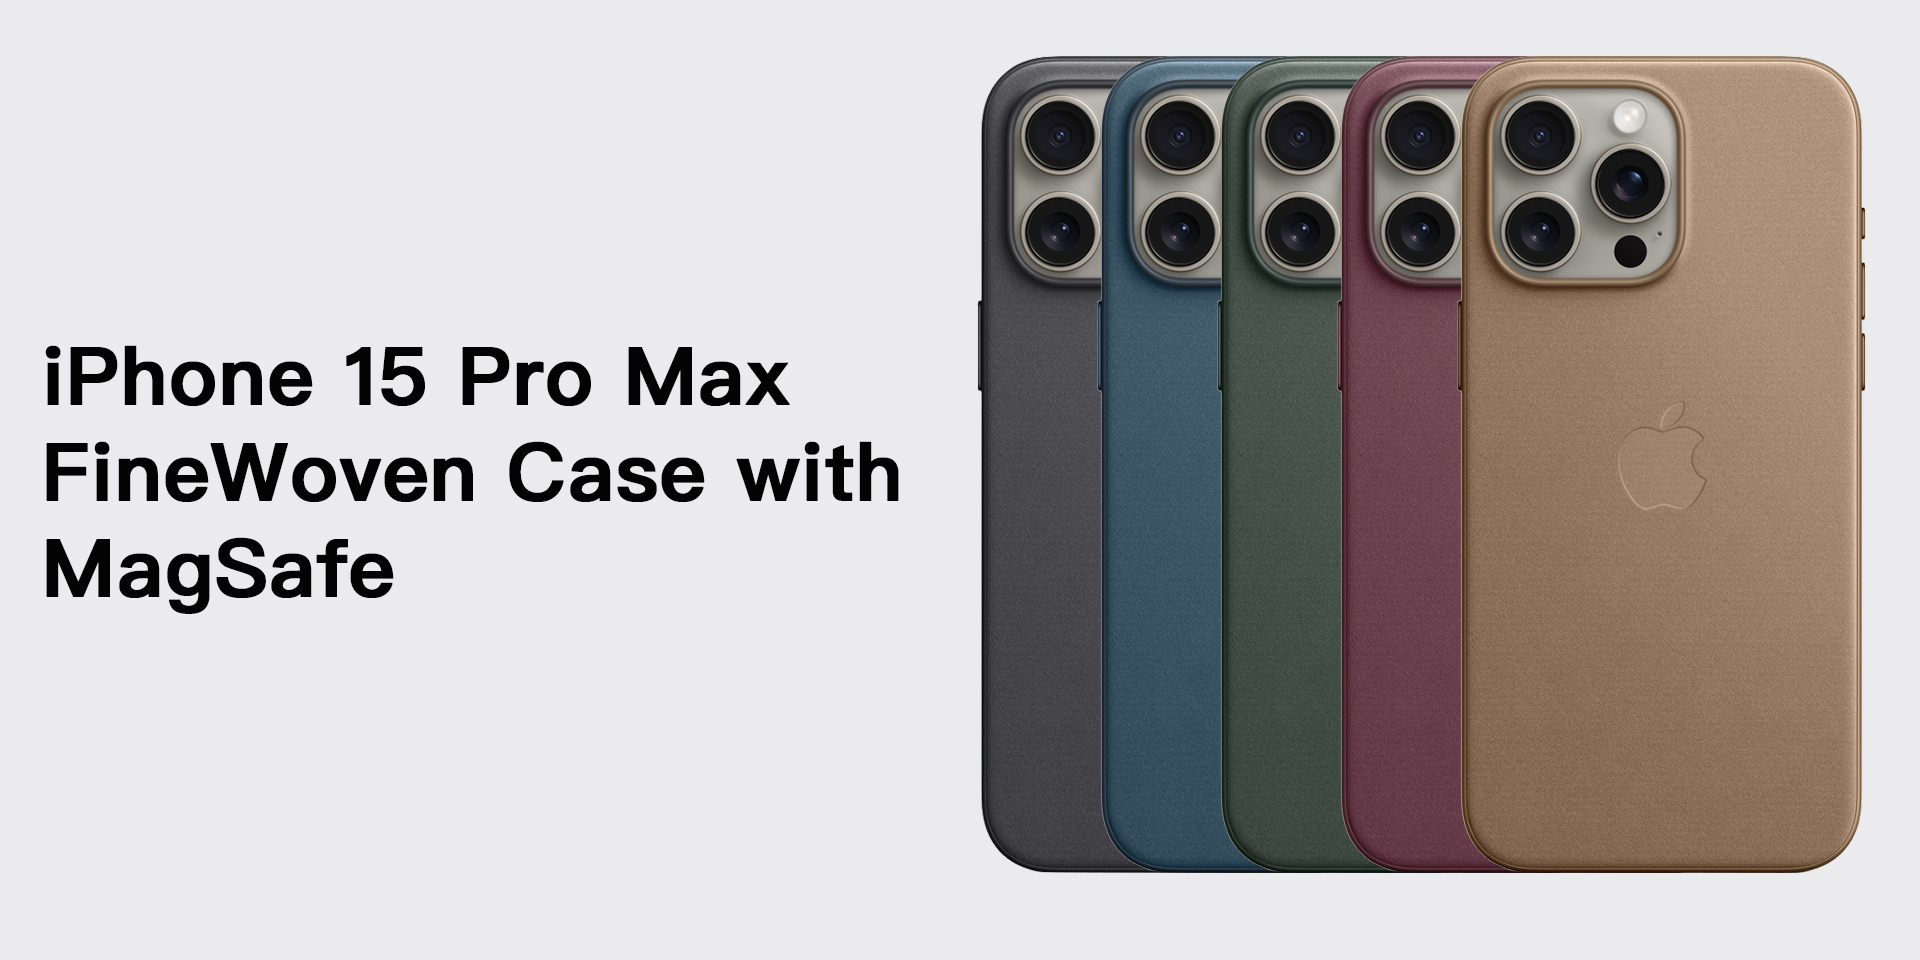 iPhone 15 Pro Max FineWoven Case with MagSafe